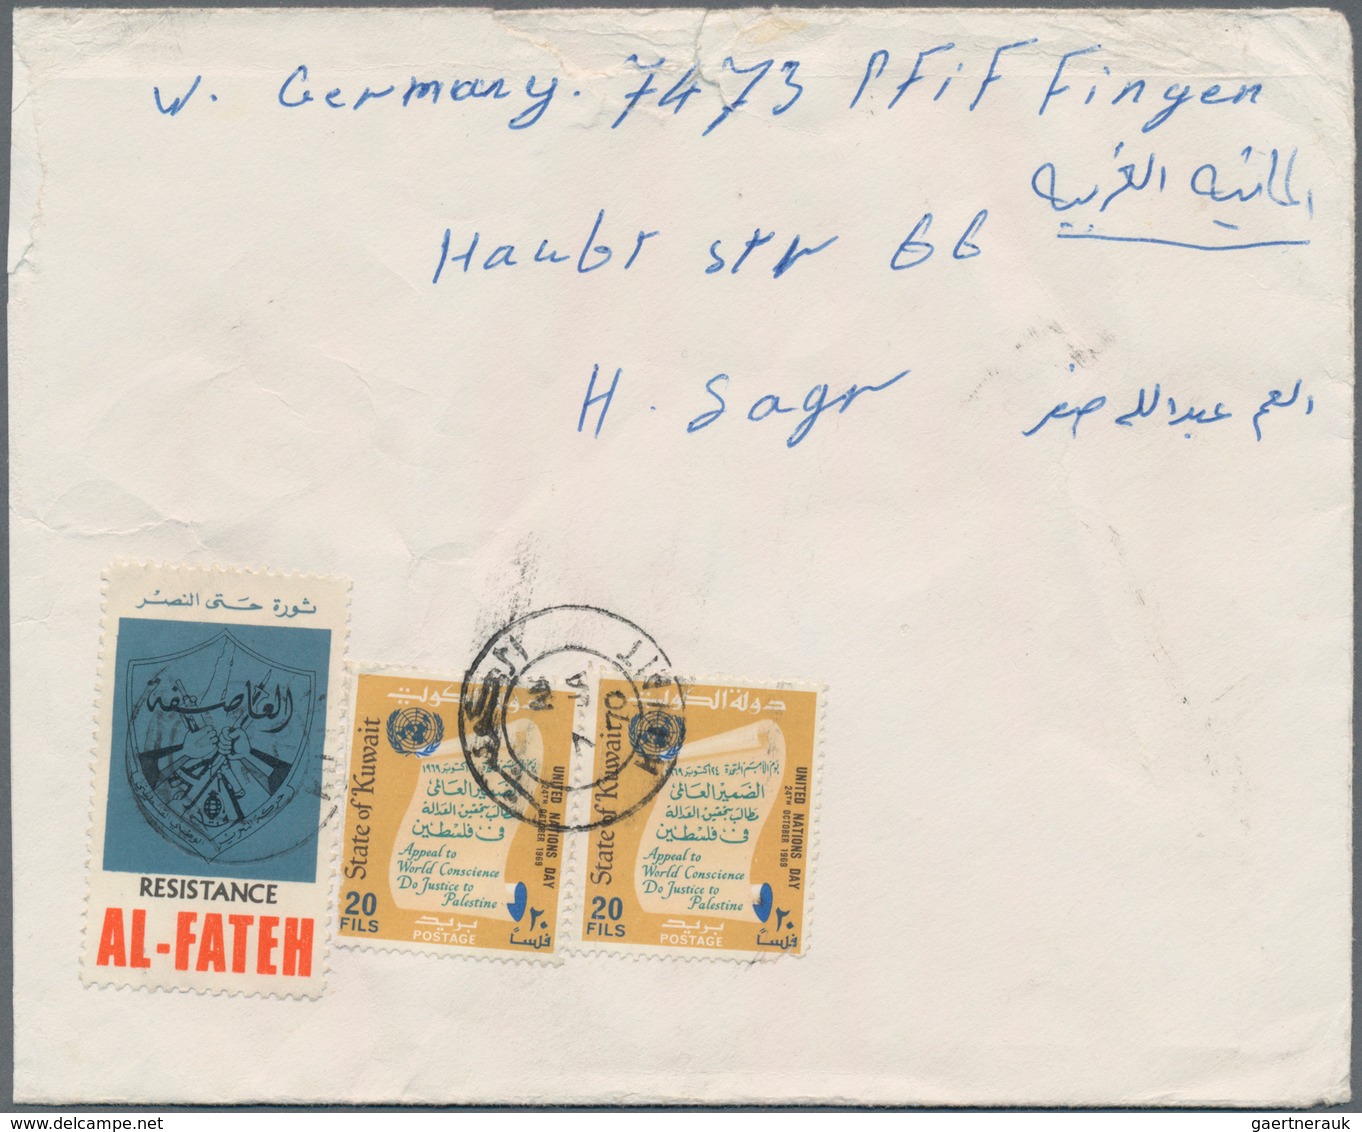 Jordanien: 1954/1989, holding of apprx. 200 covers/cards, mainly correspondence to Germany, showing